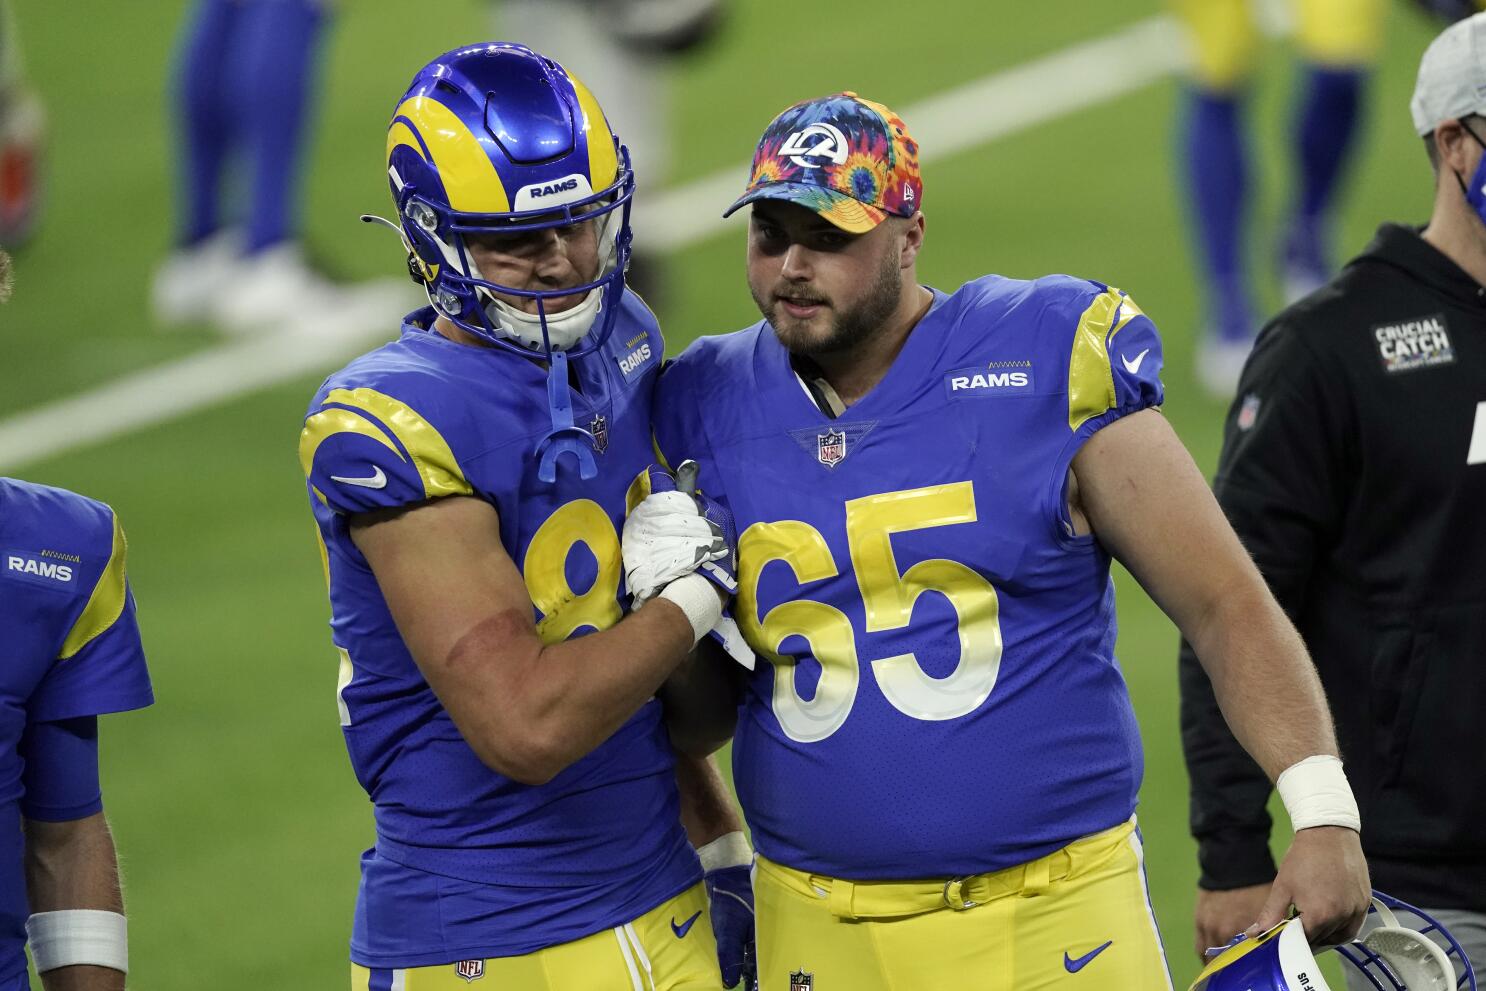 Matthew Stafford at risk for more sacks as Rams injuries grow